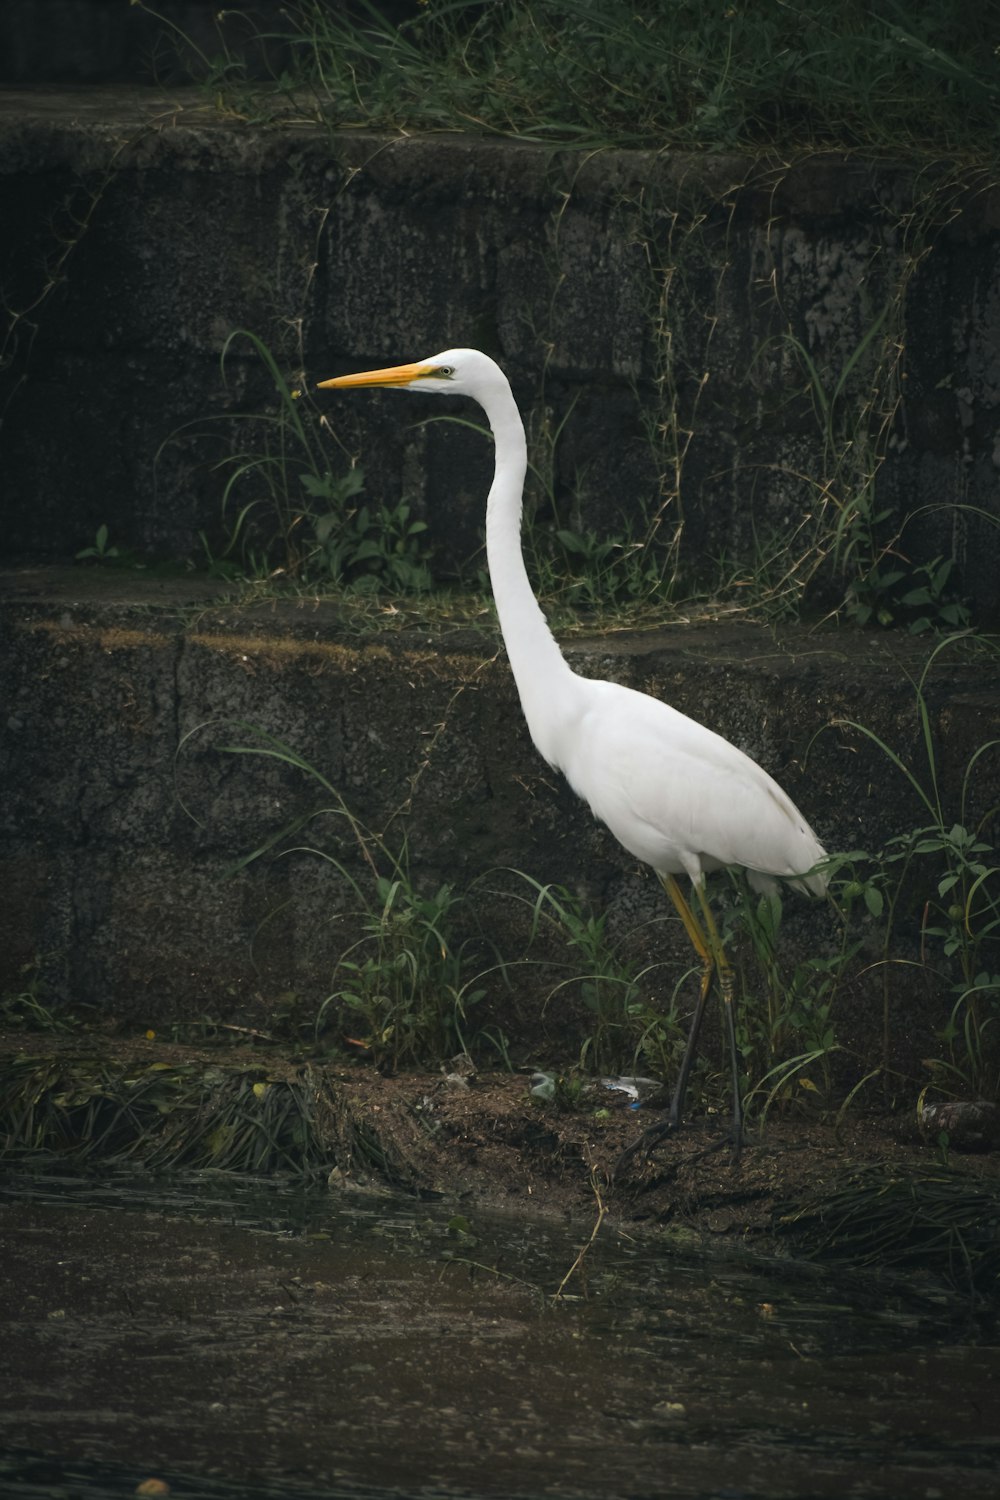 a white bird with a long neck standing in the water